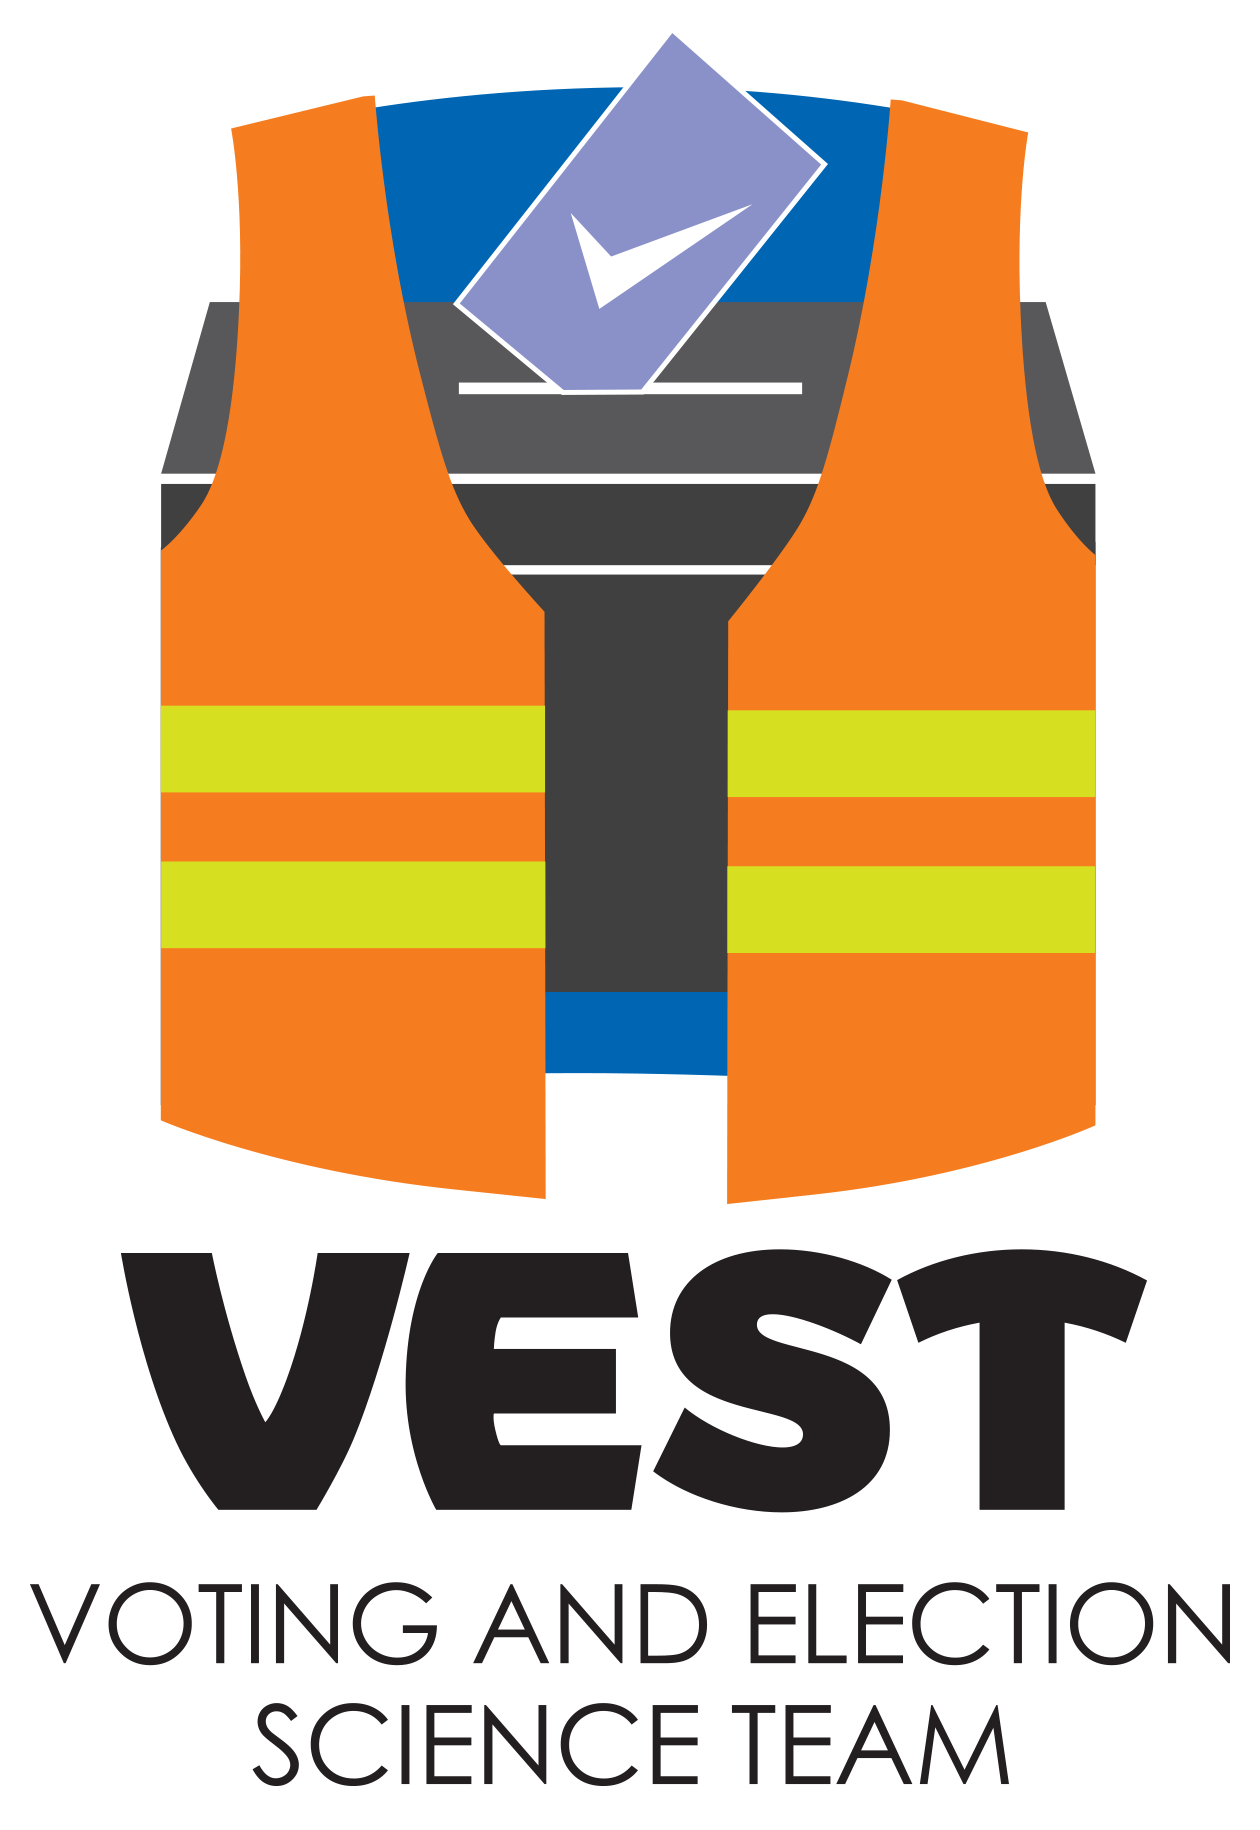 VEST Voting and Election Science Team